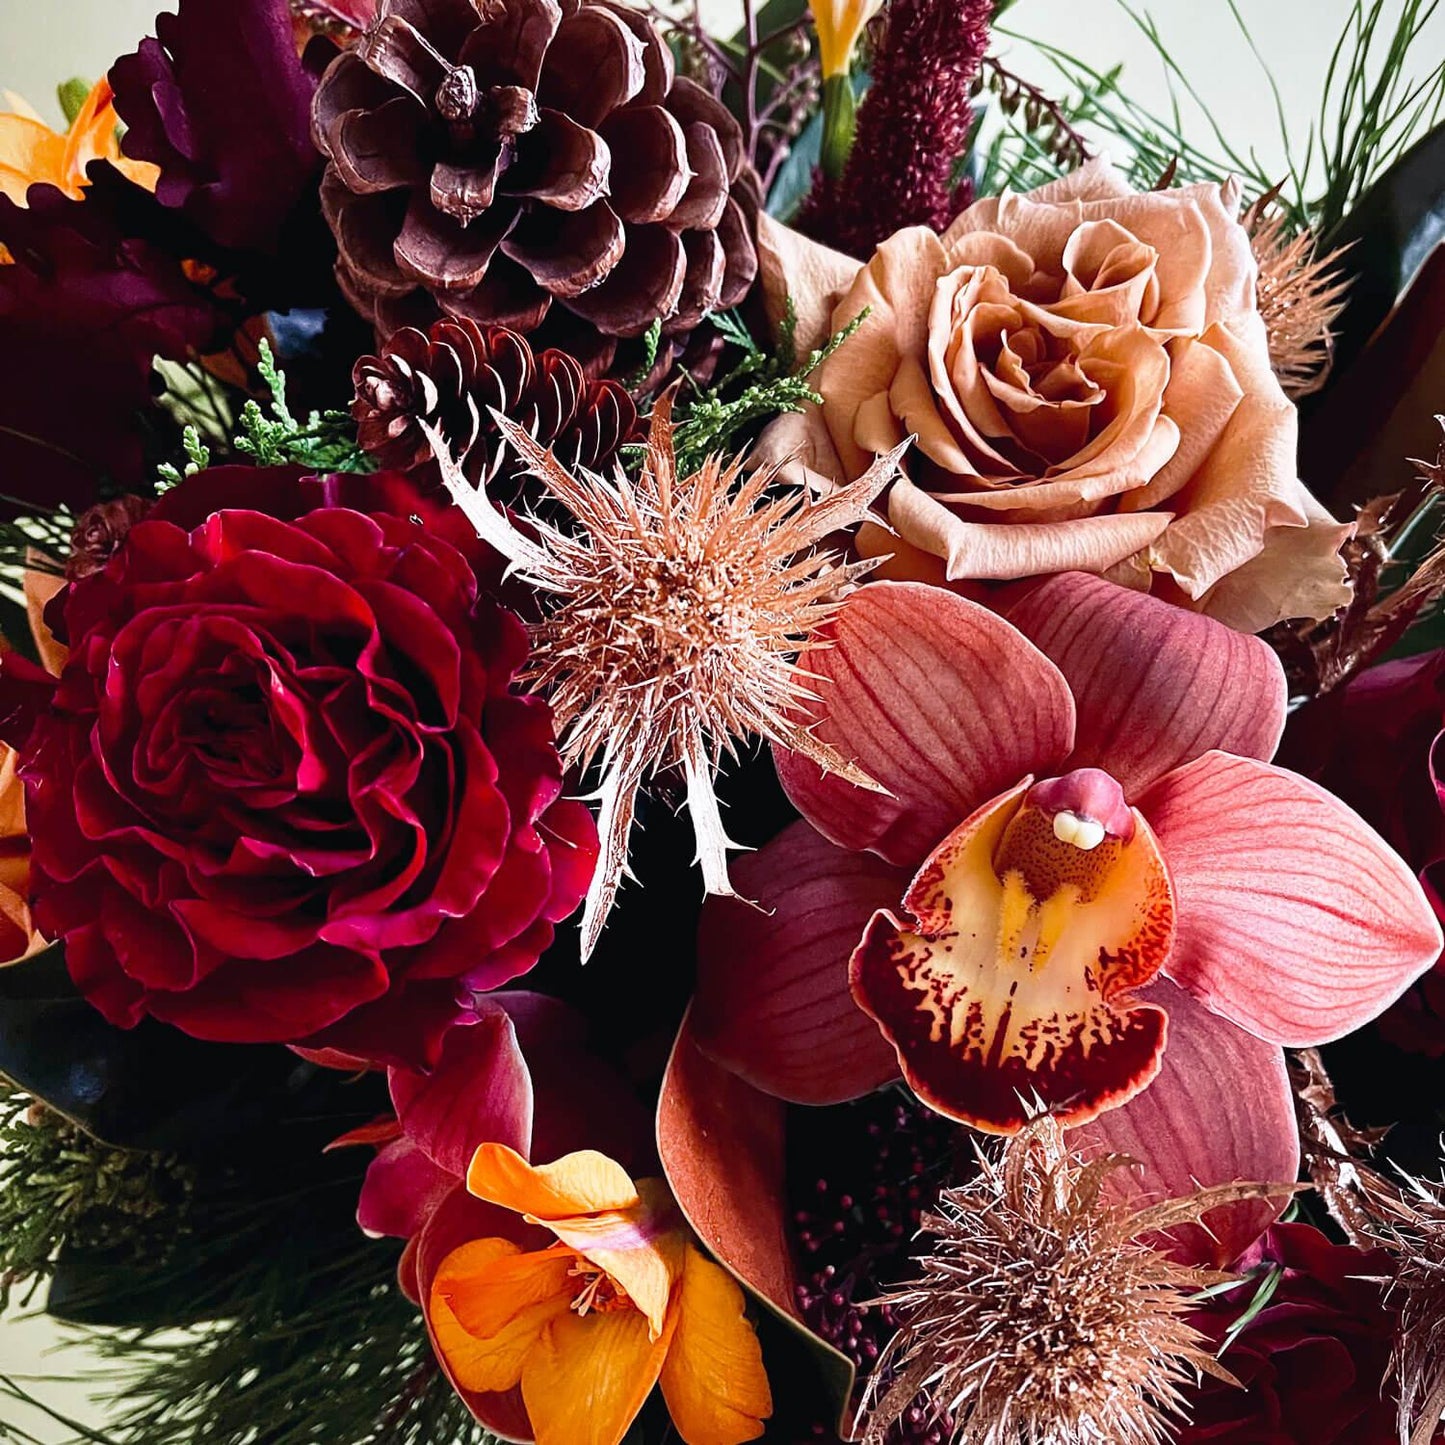 Load image into Gallery viewer, Close-up image of a celebratory bouquet featuring vivid jewel tones against deep winter evergreens and cones. Order online for same-day flower delivery from the best florist in Toronto near you.
